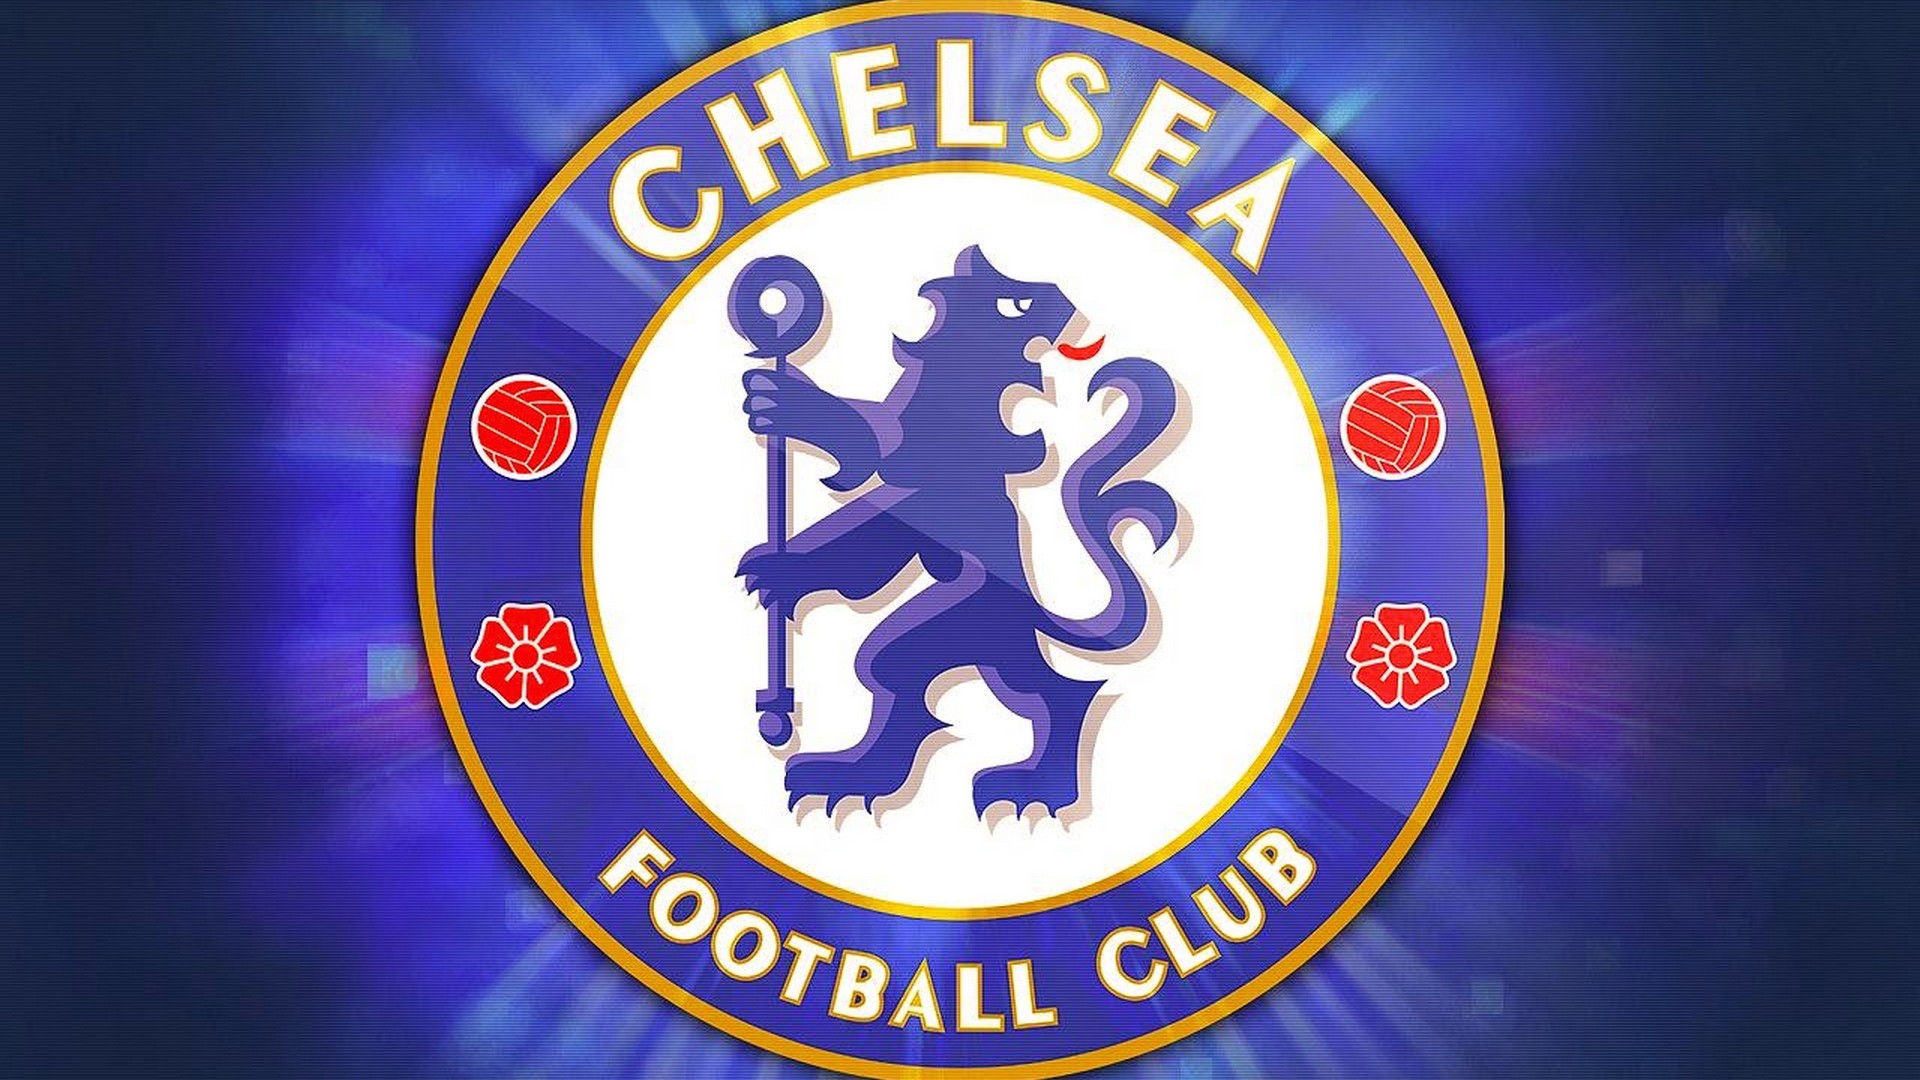 Chelsea FC Wallpaper with resolution 1920x1080 pixel. You can make this wallpaper for your Mac or Windows Desktop Background, iPhone, Android or Tablet and another Smartphone device